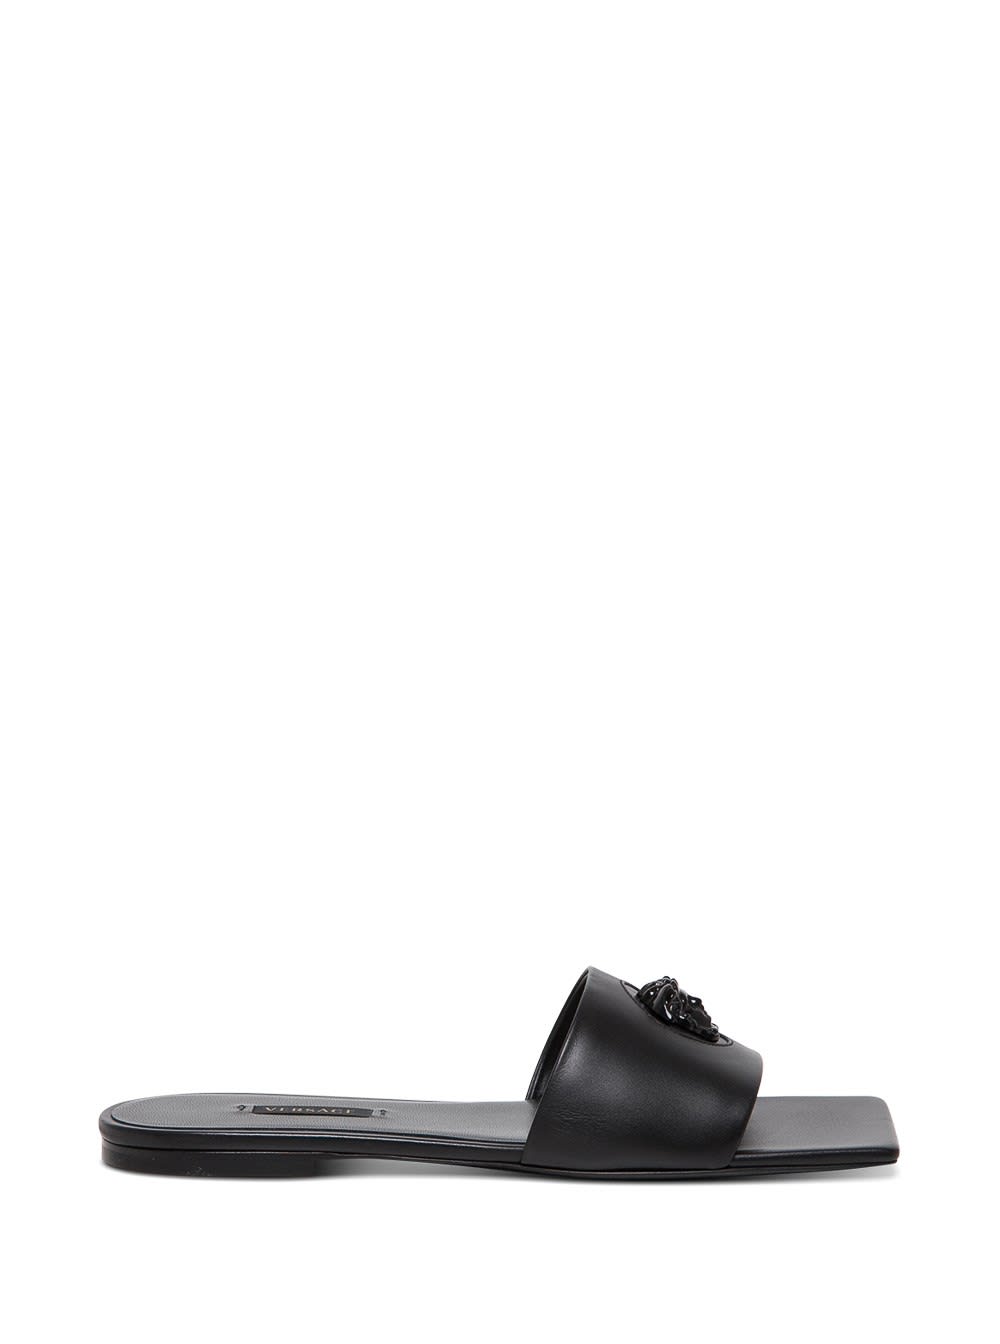 Buy Versace Black Leather Mules With Medusa Logo online, shop Versace shoes with free shipping